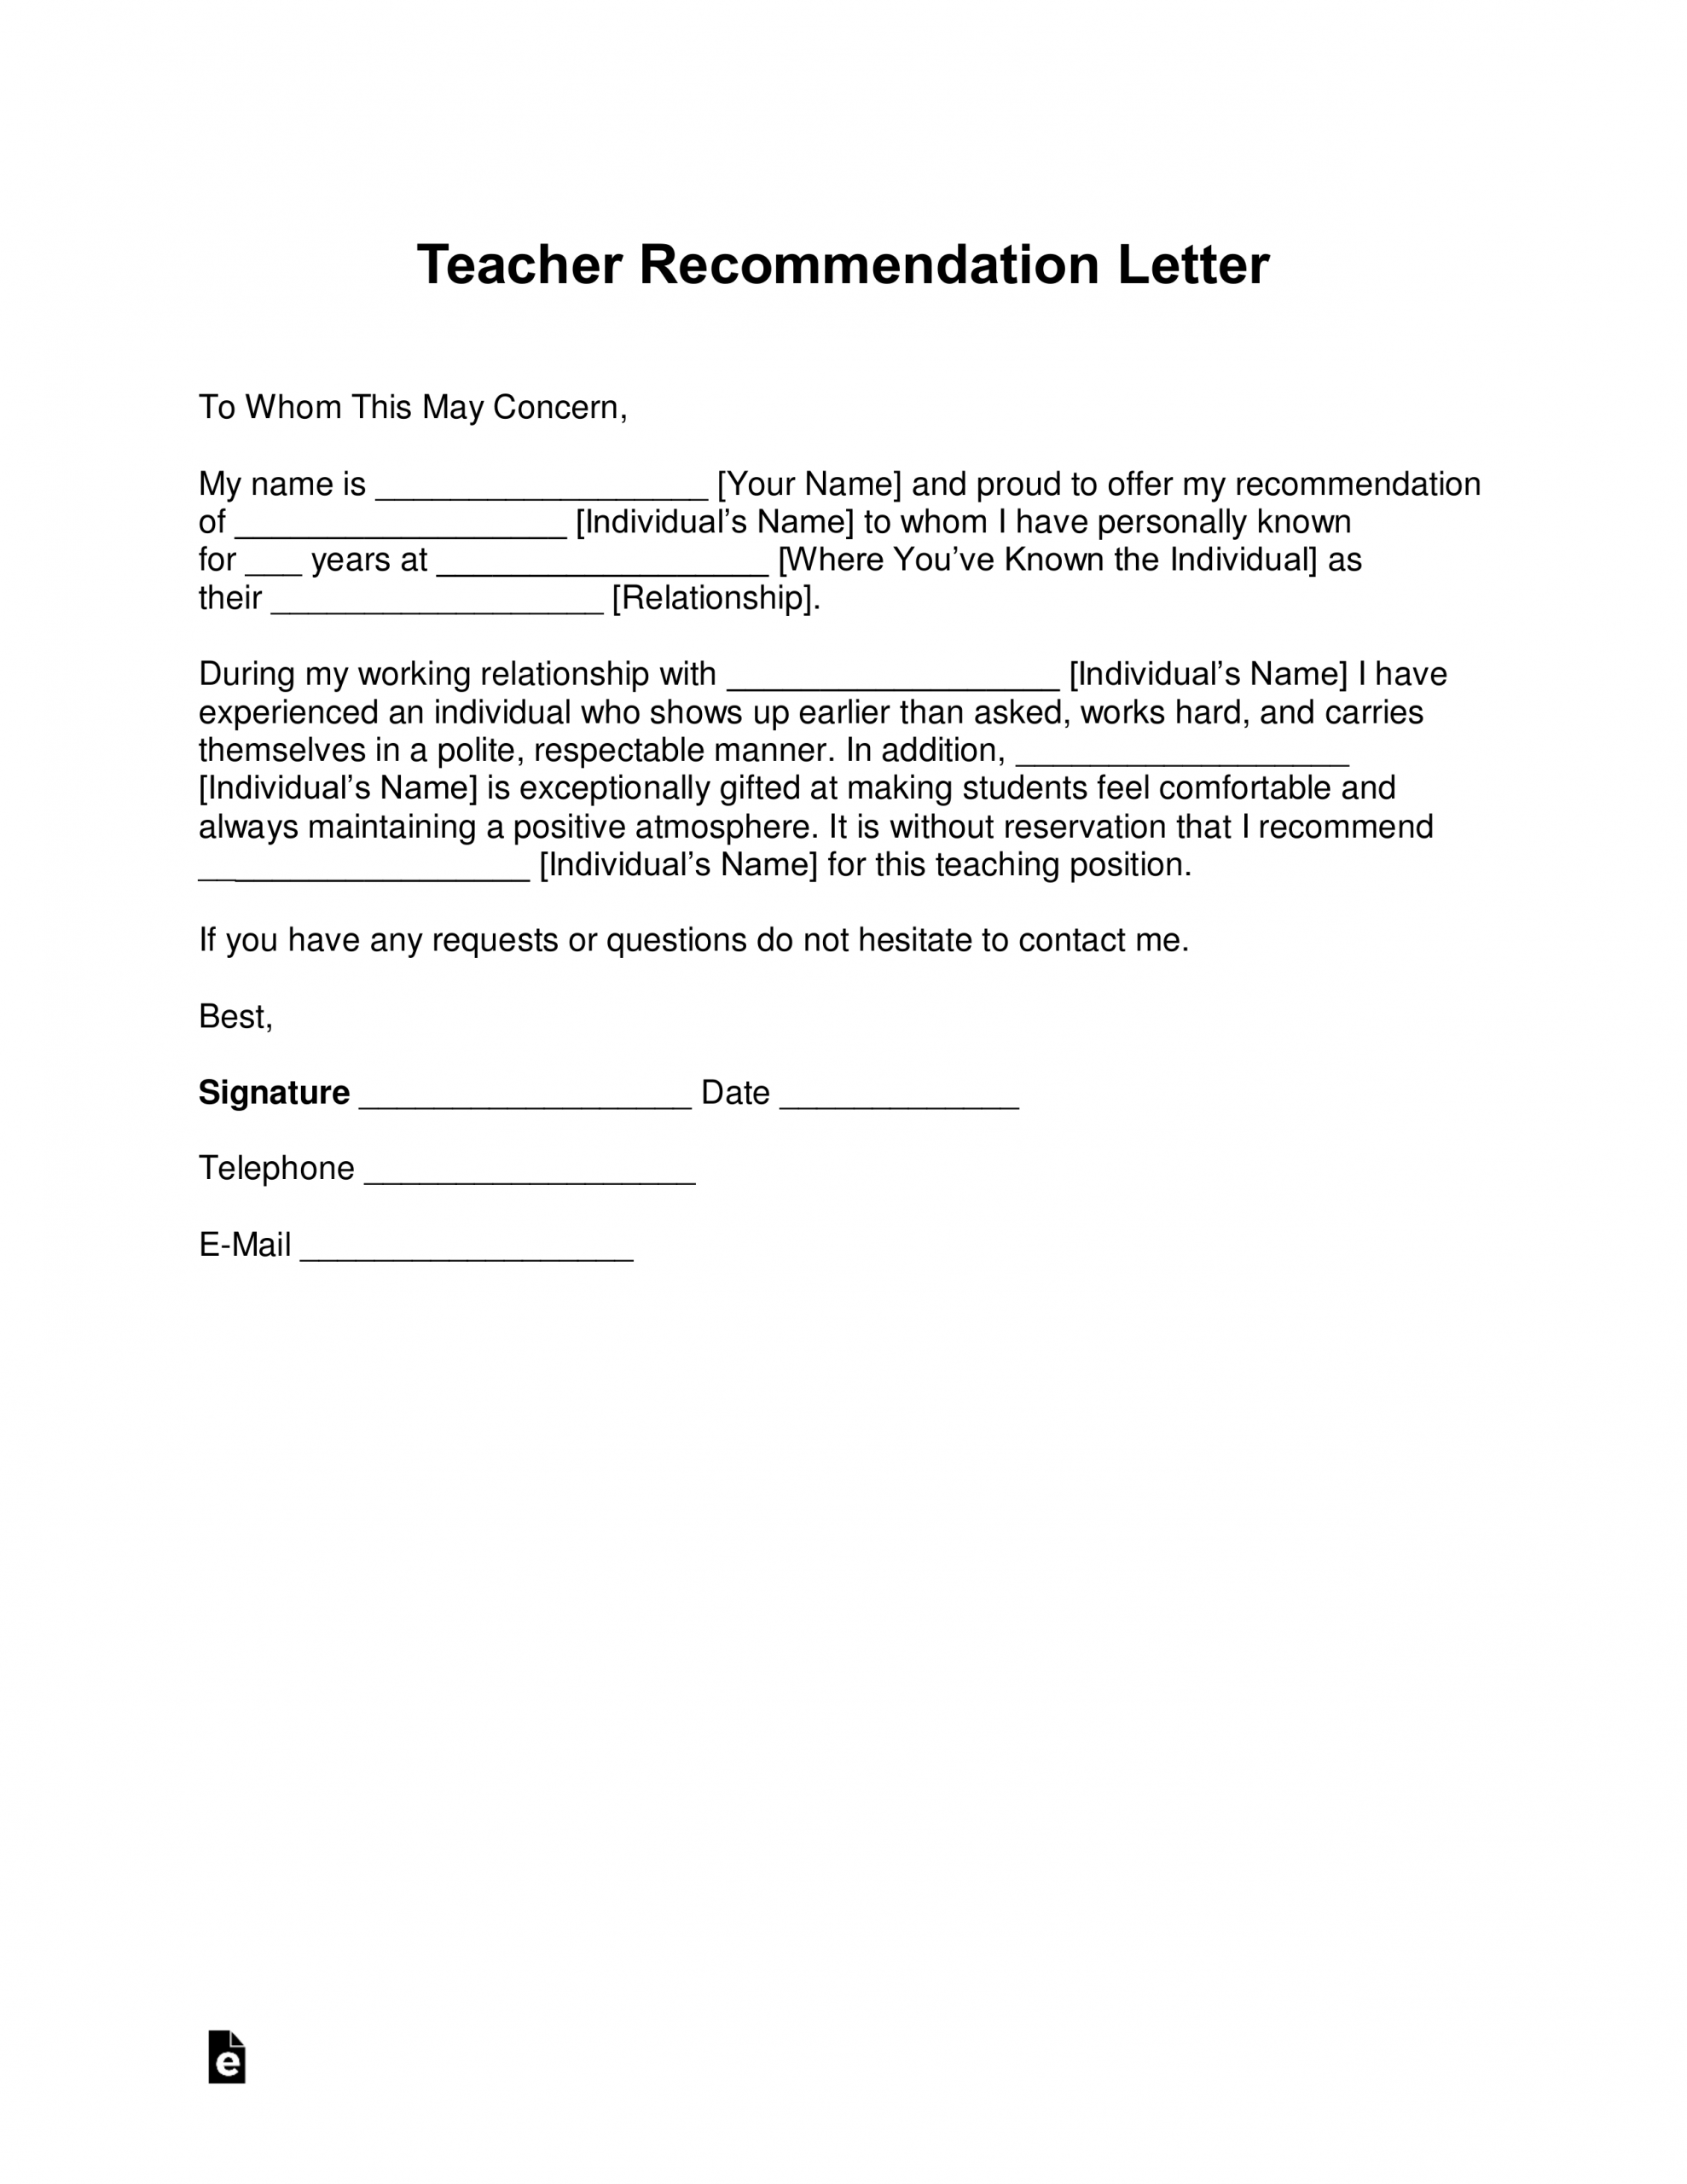 Free Teacher Recommendation Letter Template With Samples pertaining to dimensions 2550 X 3301